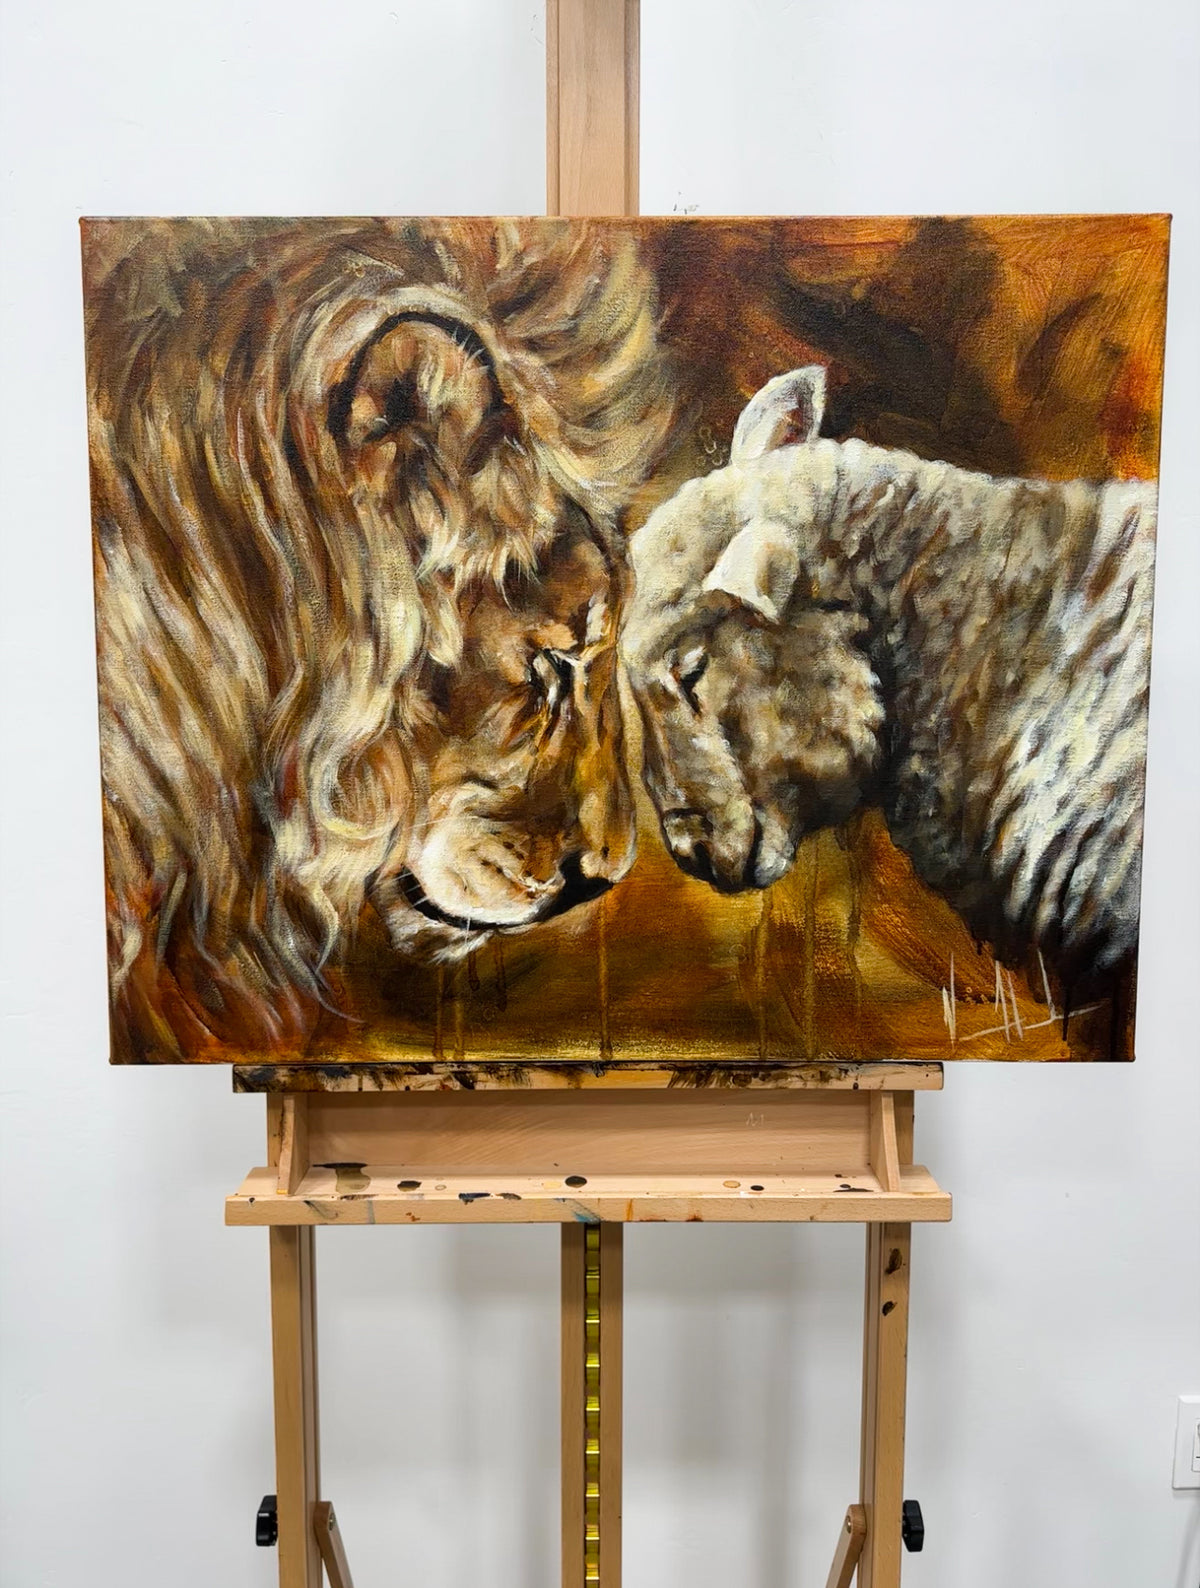 Compassion of a King - 24”x30” Original Acrylic Painting